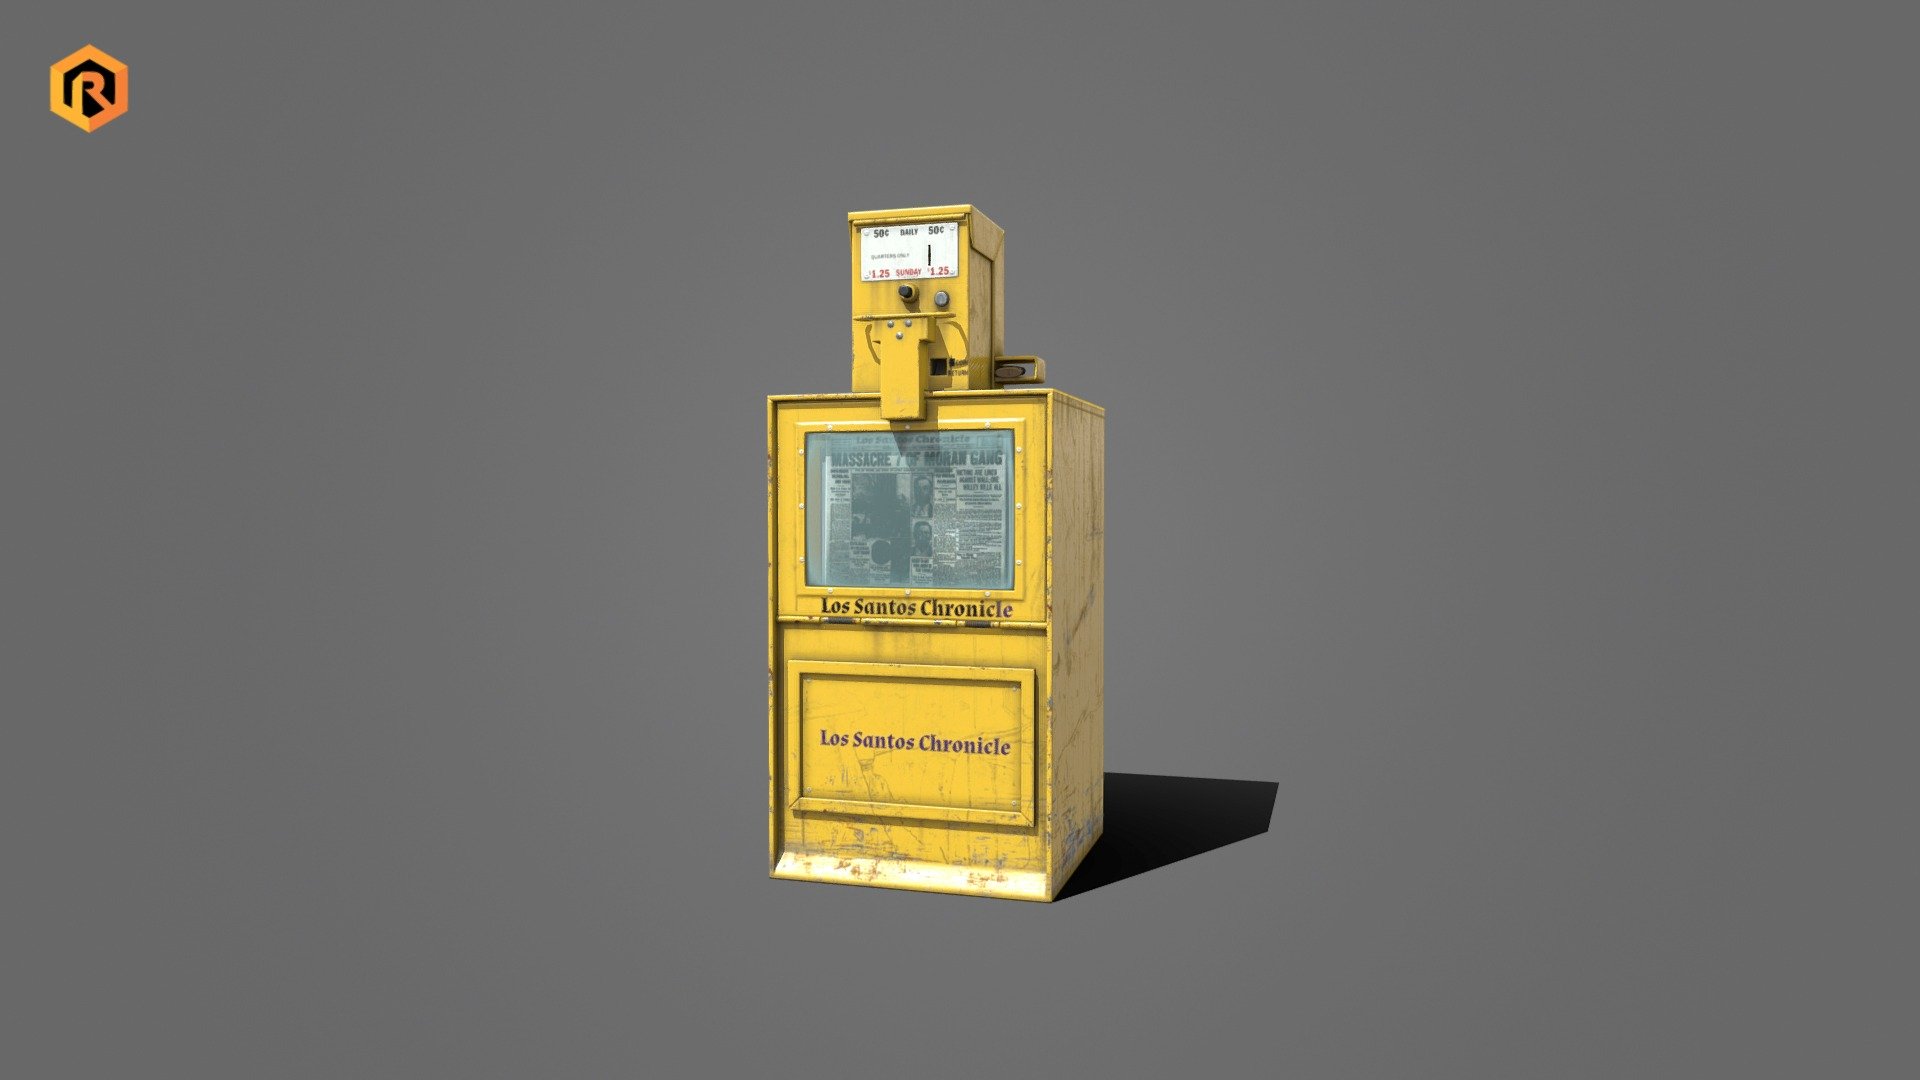 Low-poly PBR 3D model of Newspaper Vending Machine.

Interior part is also modeled and the opening is a separate object so you can animate it.

This object is best for use in games and other VR / AR, real-time applications such as Unity or Unreal Engine.  

Technical details:




2 PBR textures sets  (Main body and glass) 

1080 Triangles

1329  Vertices

The model is divided into few 2 objects (Main body and doors)

Model completely unwrapped.

Model is fully textured with all materials applied.

Pivot points are correctly placed to suit animation process.

Lot of additional file formats included (Blender, Unity, Maya etc.)

More file formats are available in additional zip file on product page.  

Please feel free to contact me if you have any questions or need support for this asset 3d model